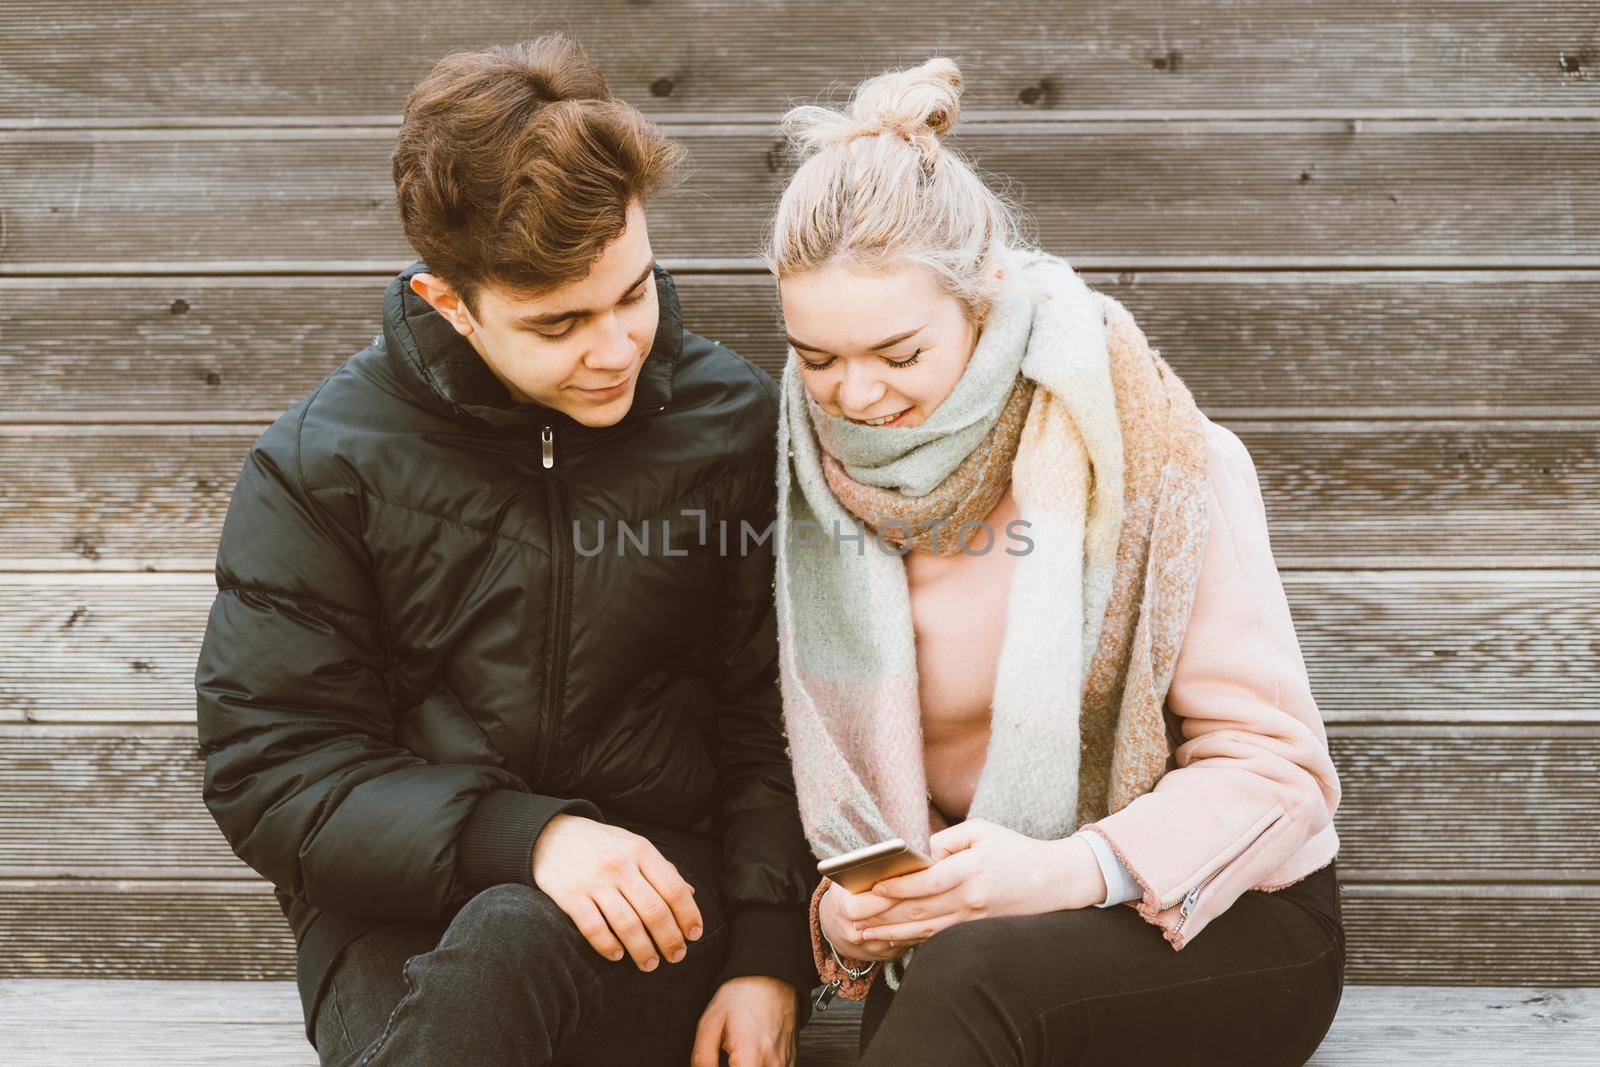 Loving teenagers on date look at mobile phones, girl shows guy something interesting on a mobile phone. Immersion in virtual world, social networks. Concept of a teen love, Smombie dating